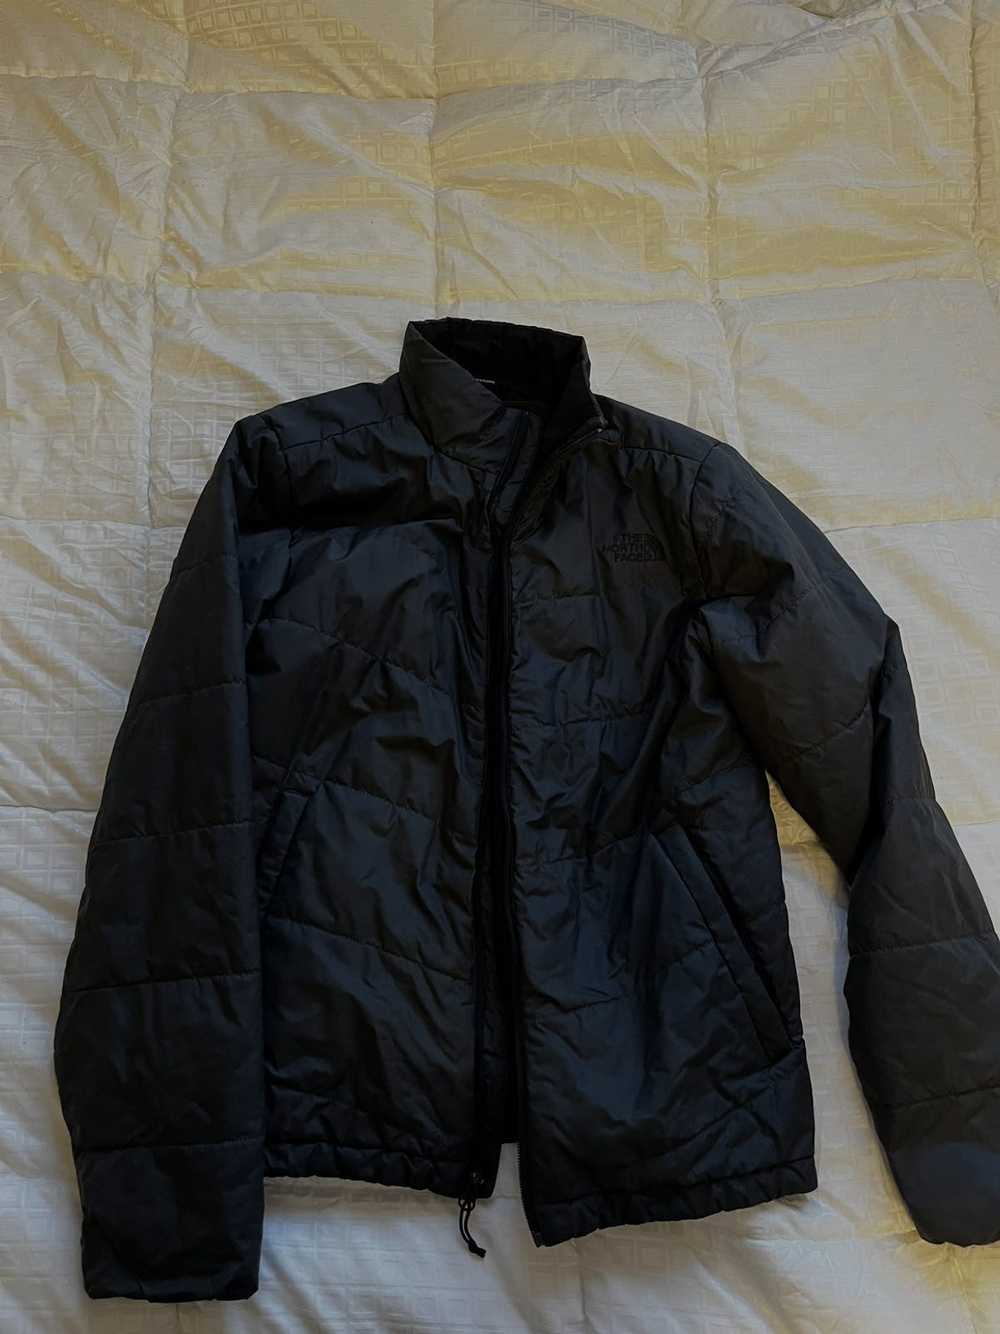 The North Face North Face Jacket - image 2